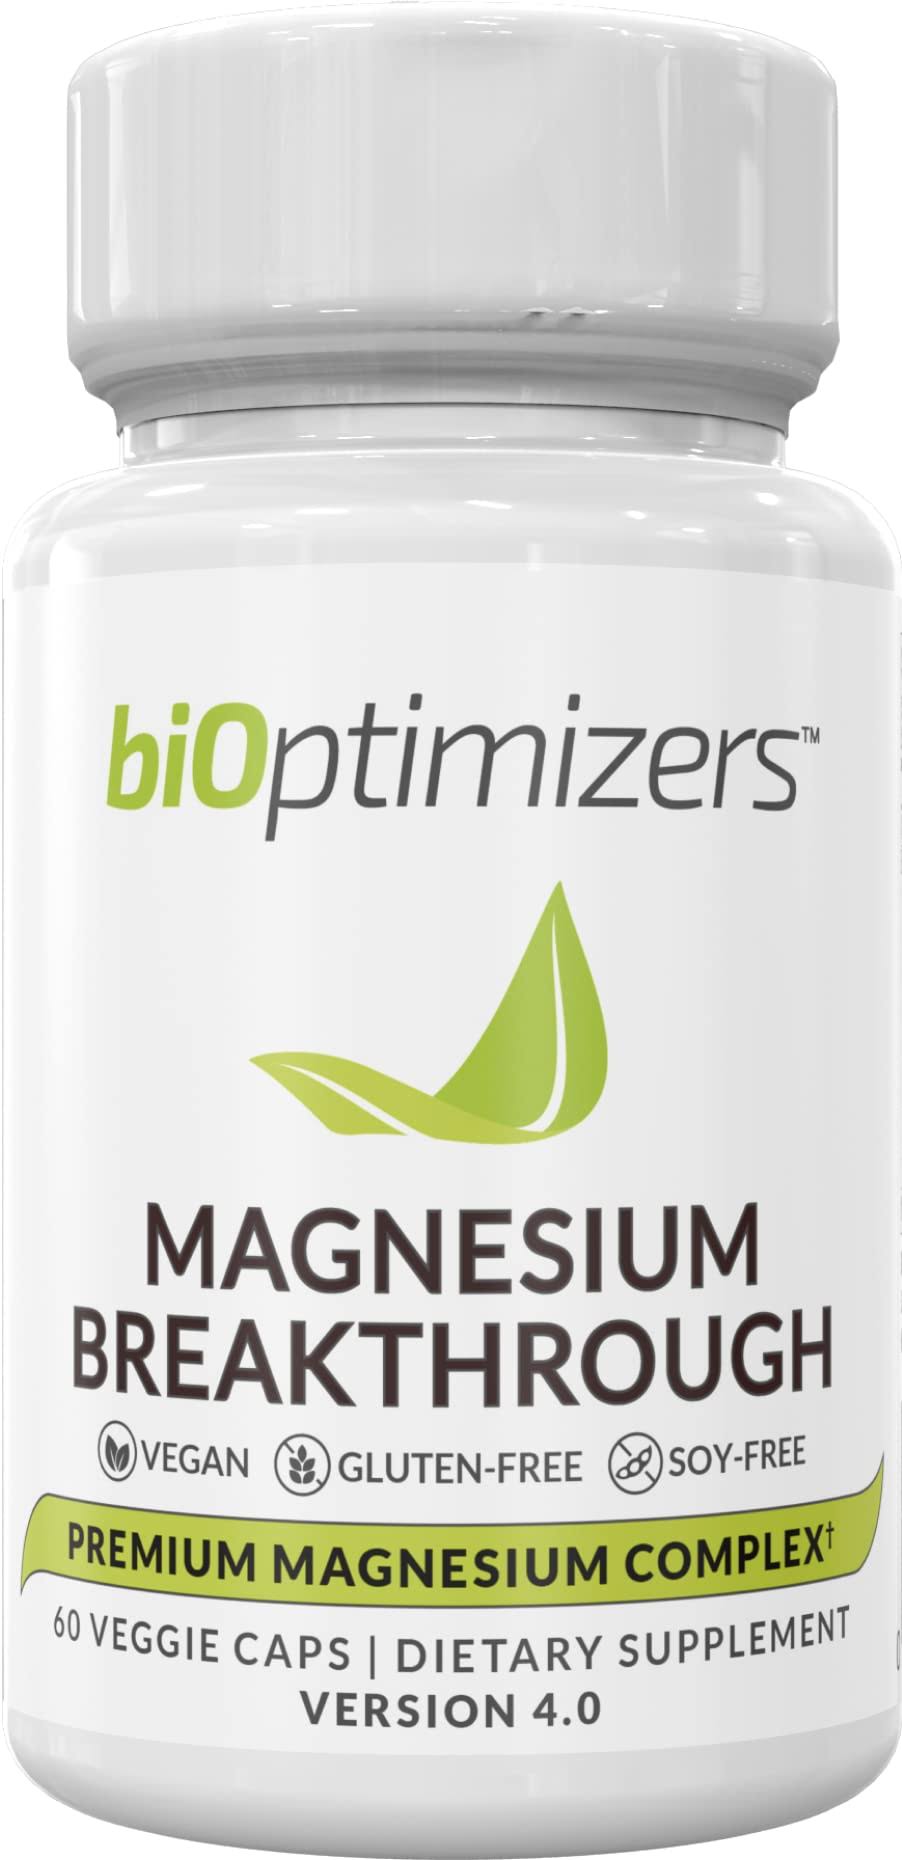 Magnesium Breakthrough Supplement 4.0 - Has 7 Forms of Magnesium Like Bisglycinate, Malate, Citrate, and More - Stress and Anxiety Relief